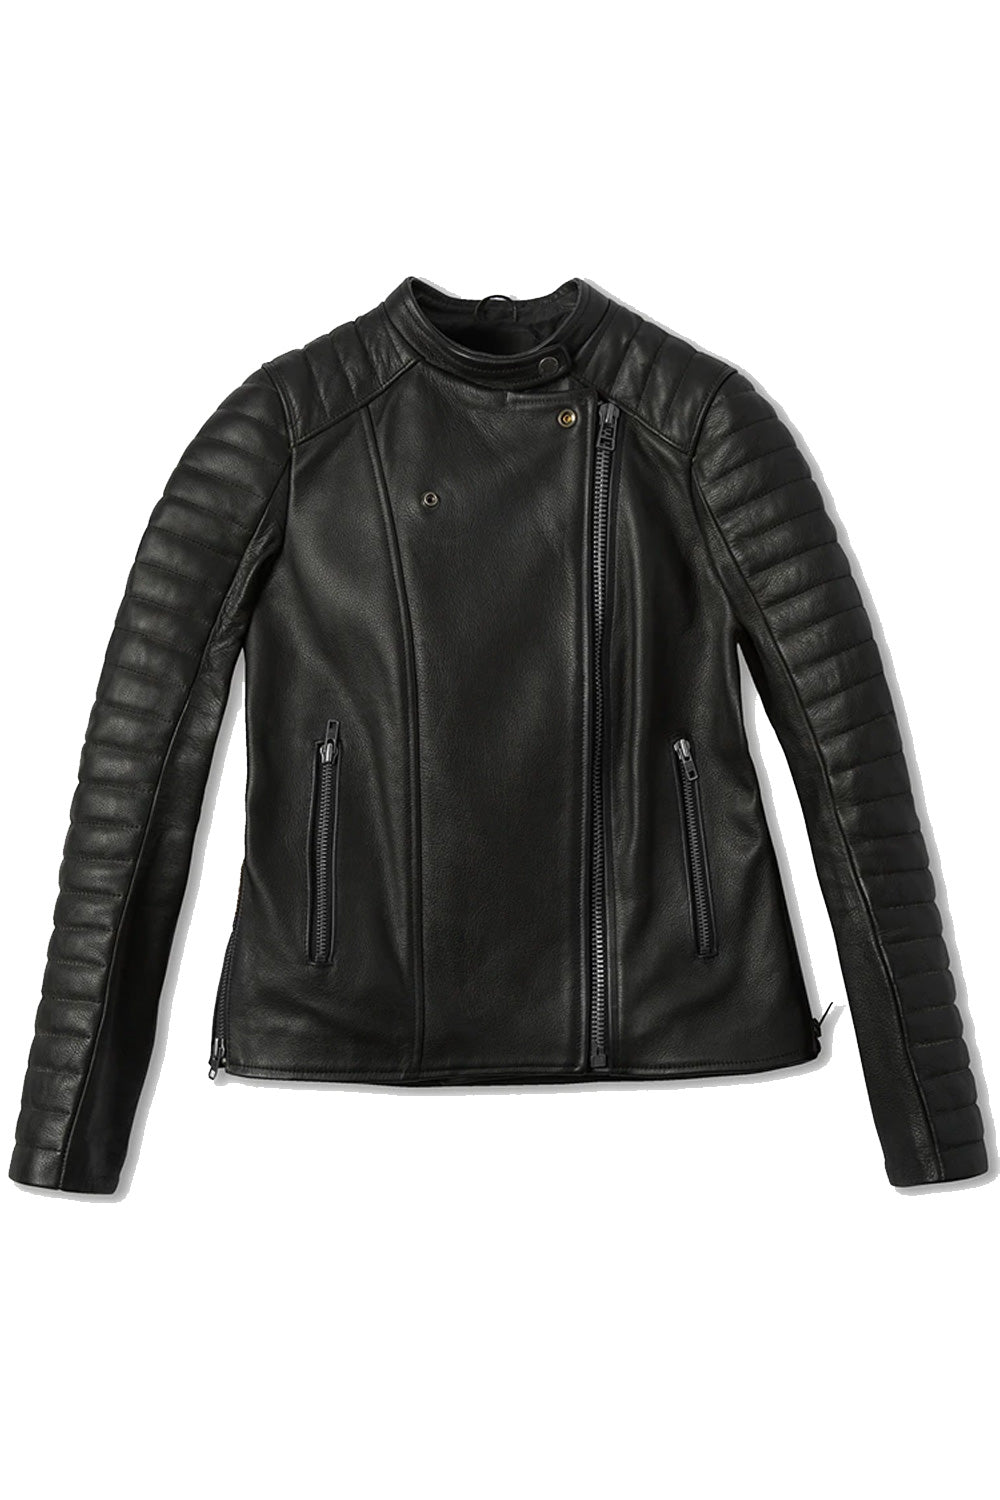 Atwyld Alltime 2.0 Women's Black Leather Motorcycle Jacket